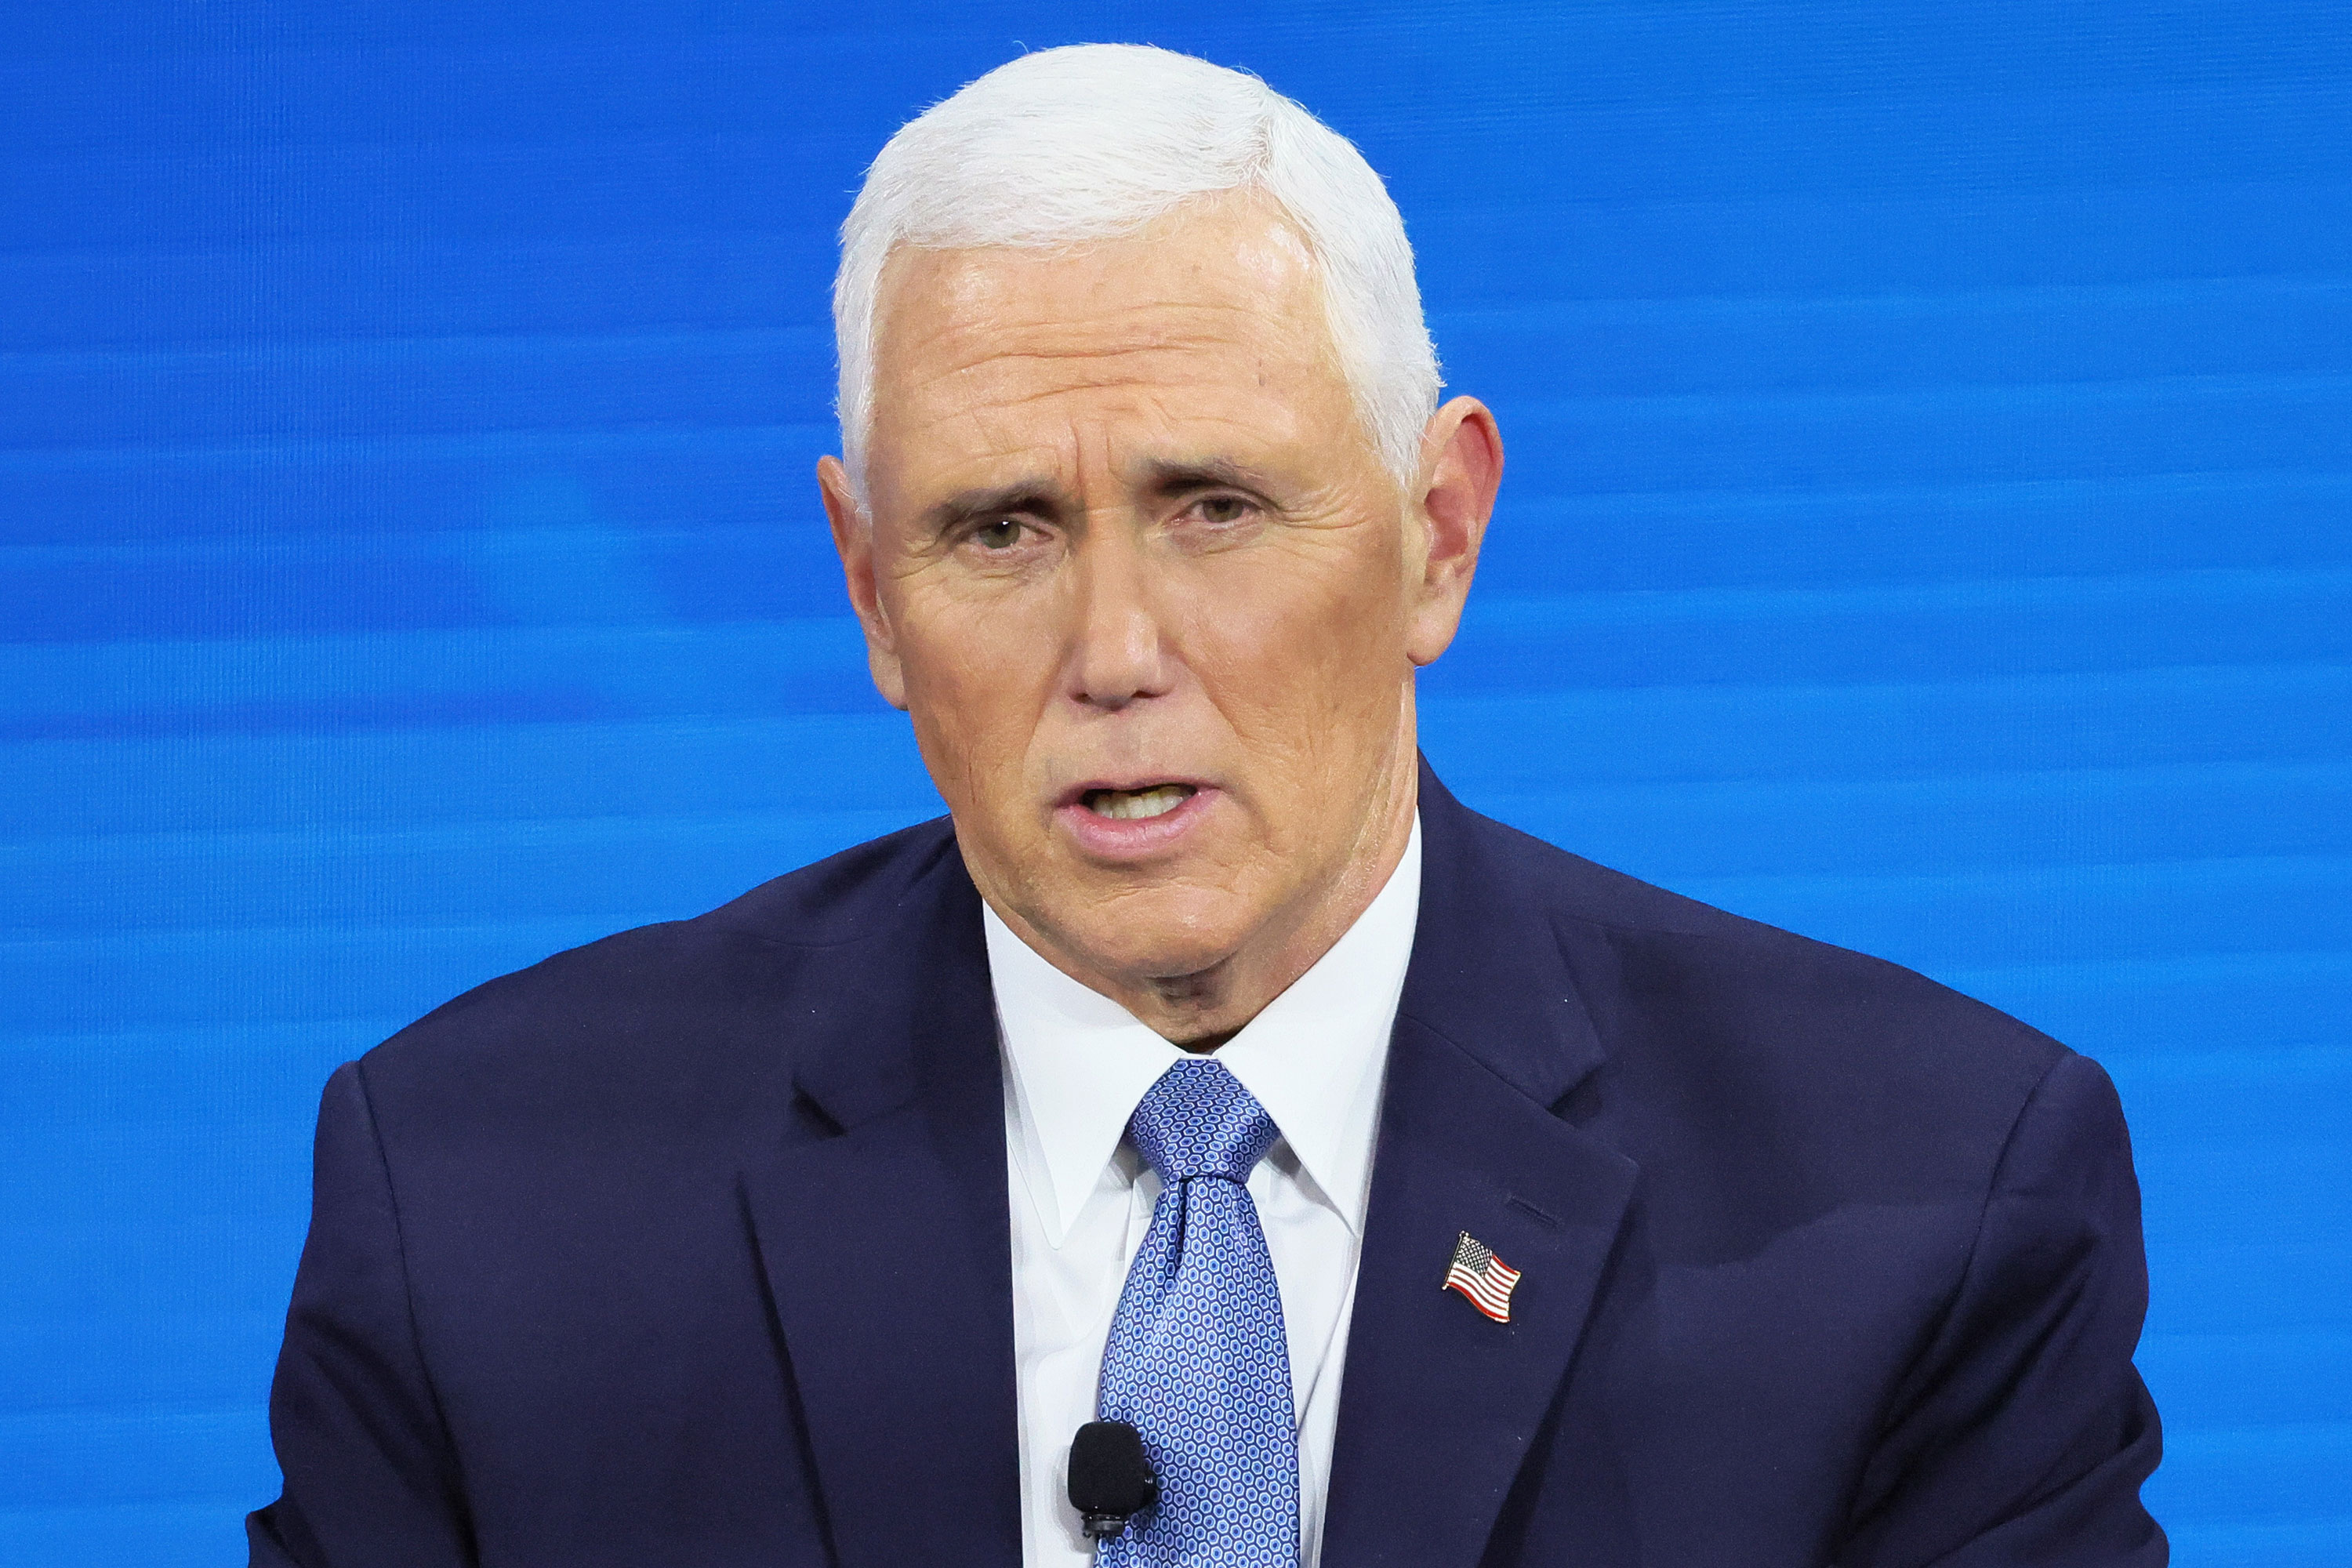 Former Vice President Mike Pence speaks at an event in New York in November.